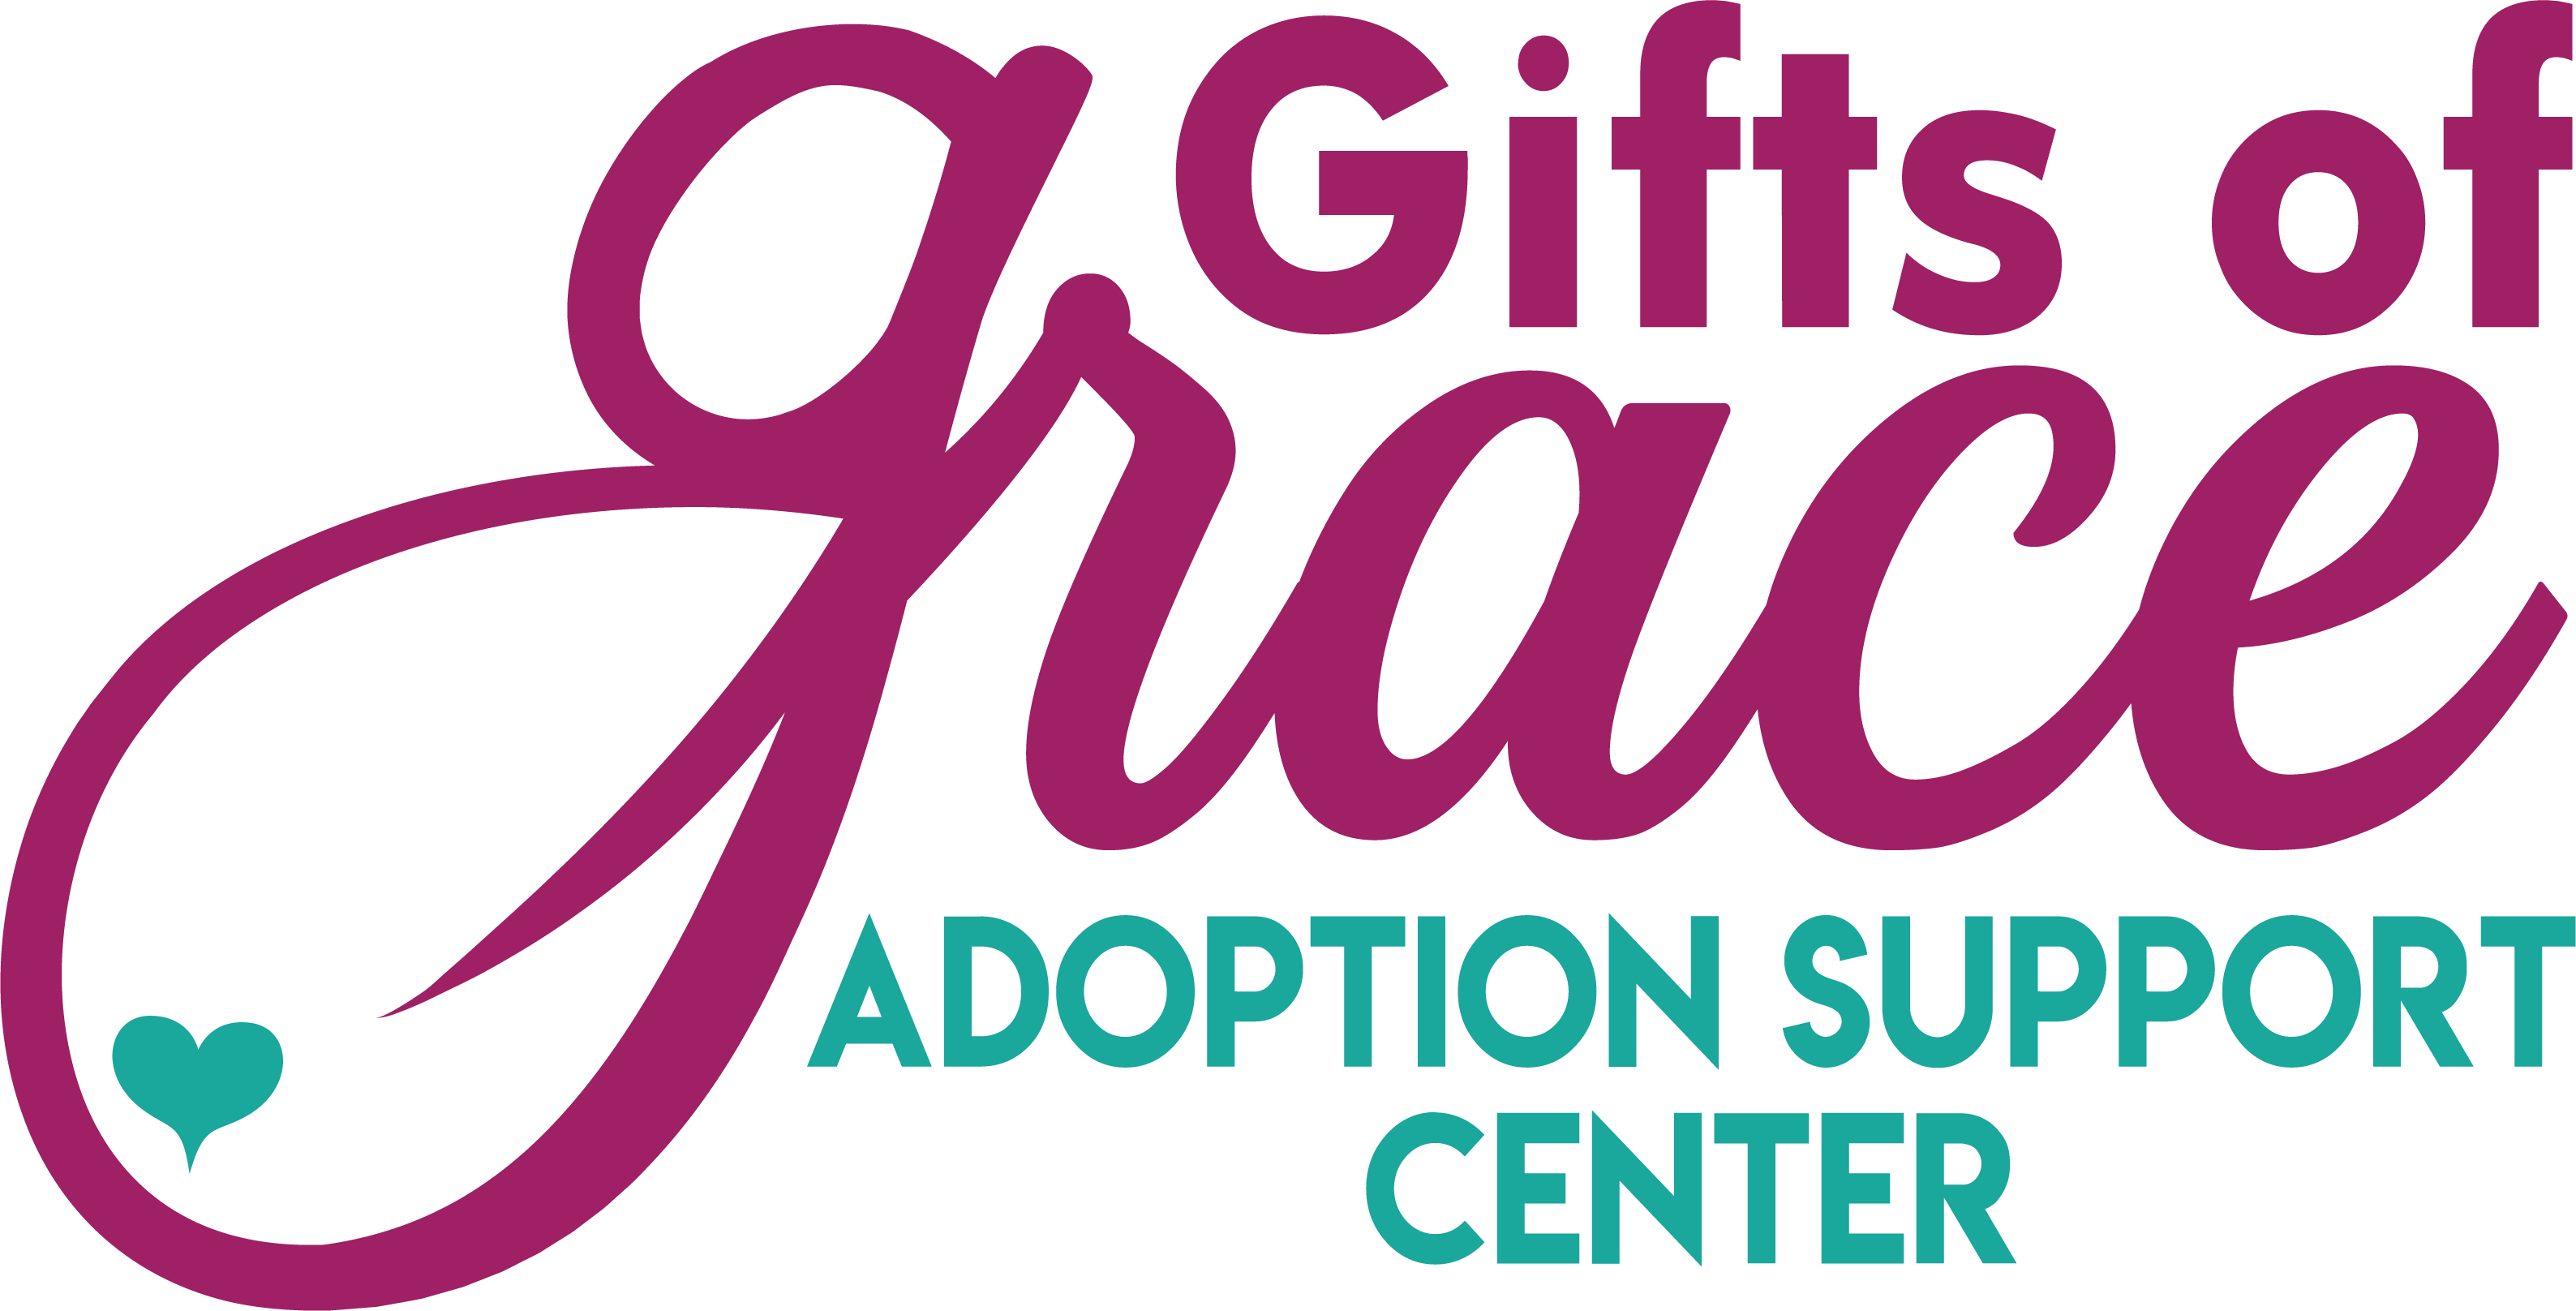 If You Ever Need a Choice: A Gifts of Grace Birth Mom Story